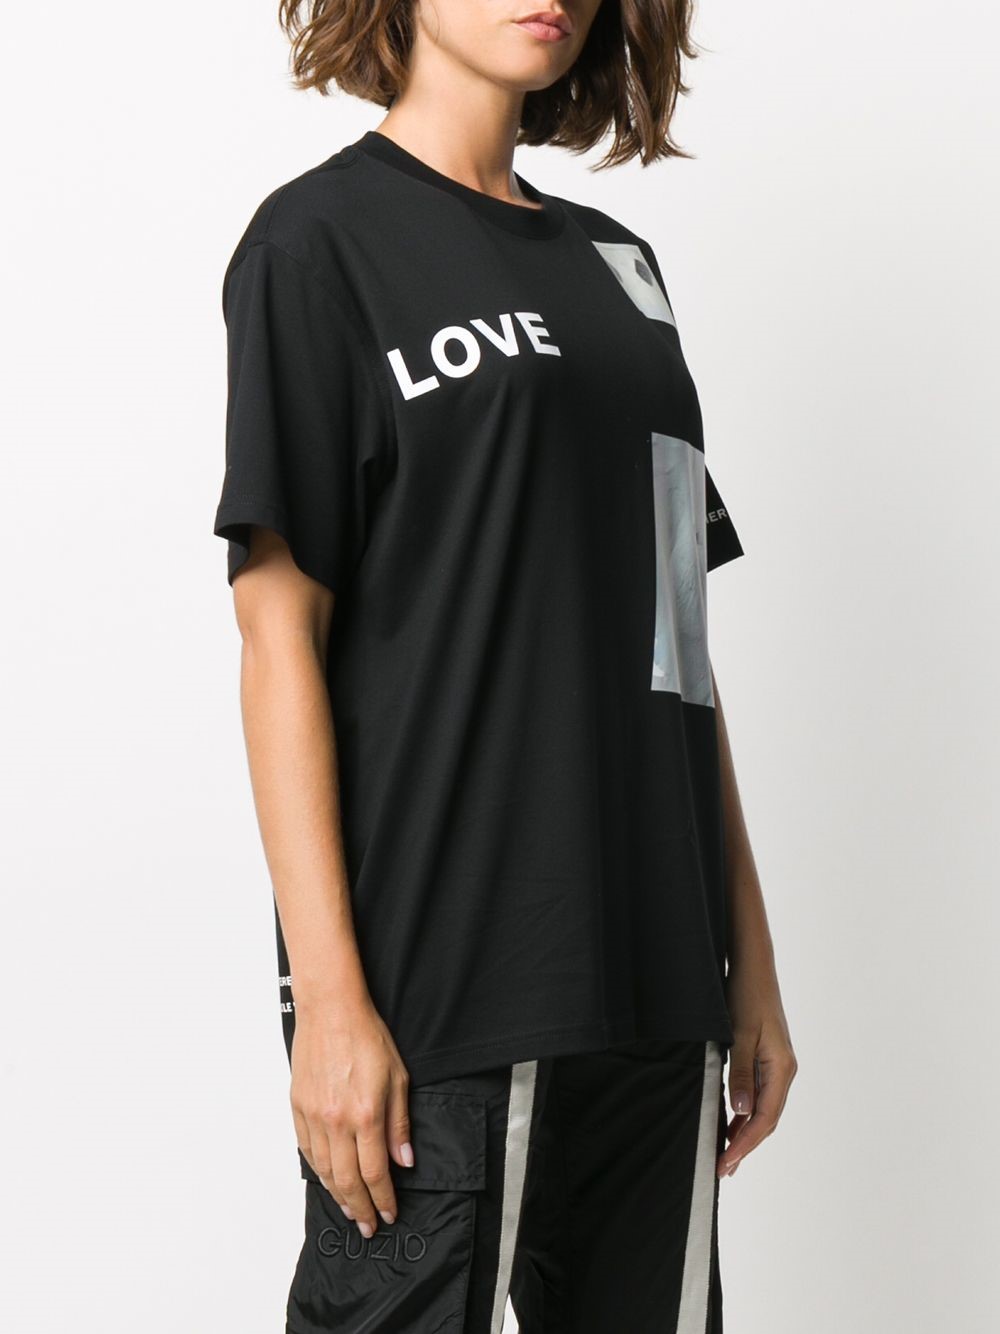 burberry CARRICK LOVE T-SHIRT available on  - 35614